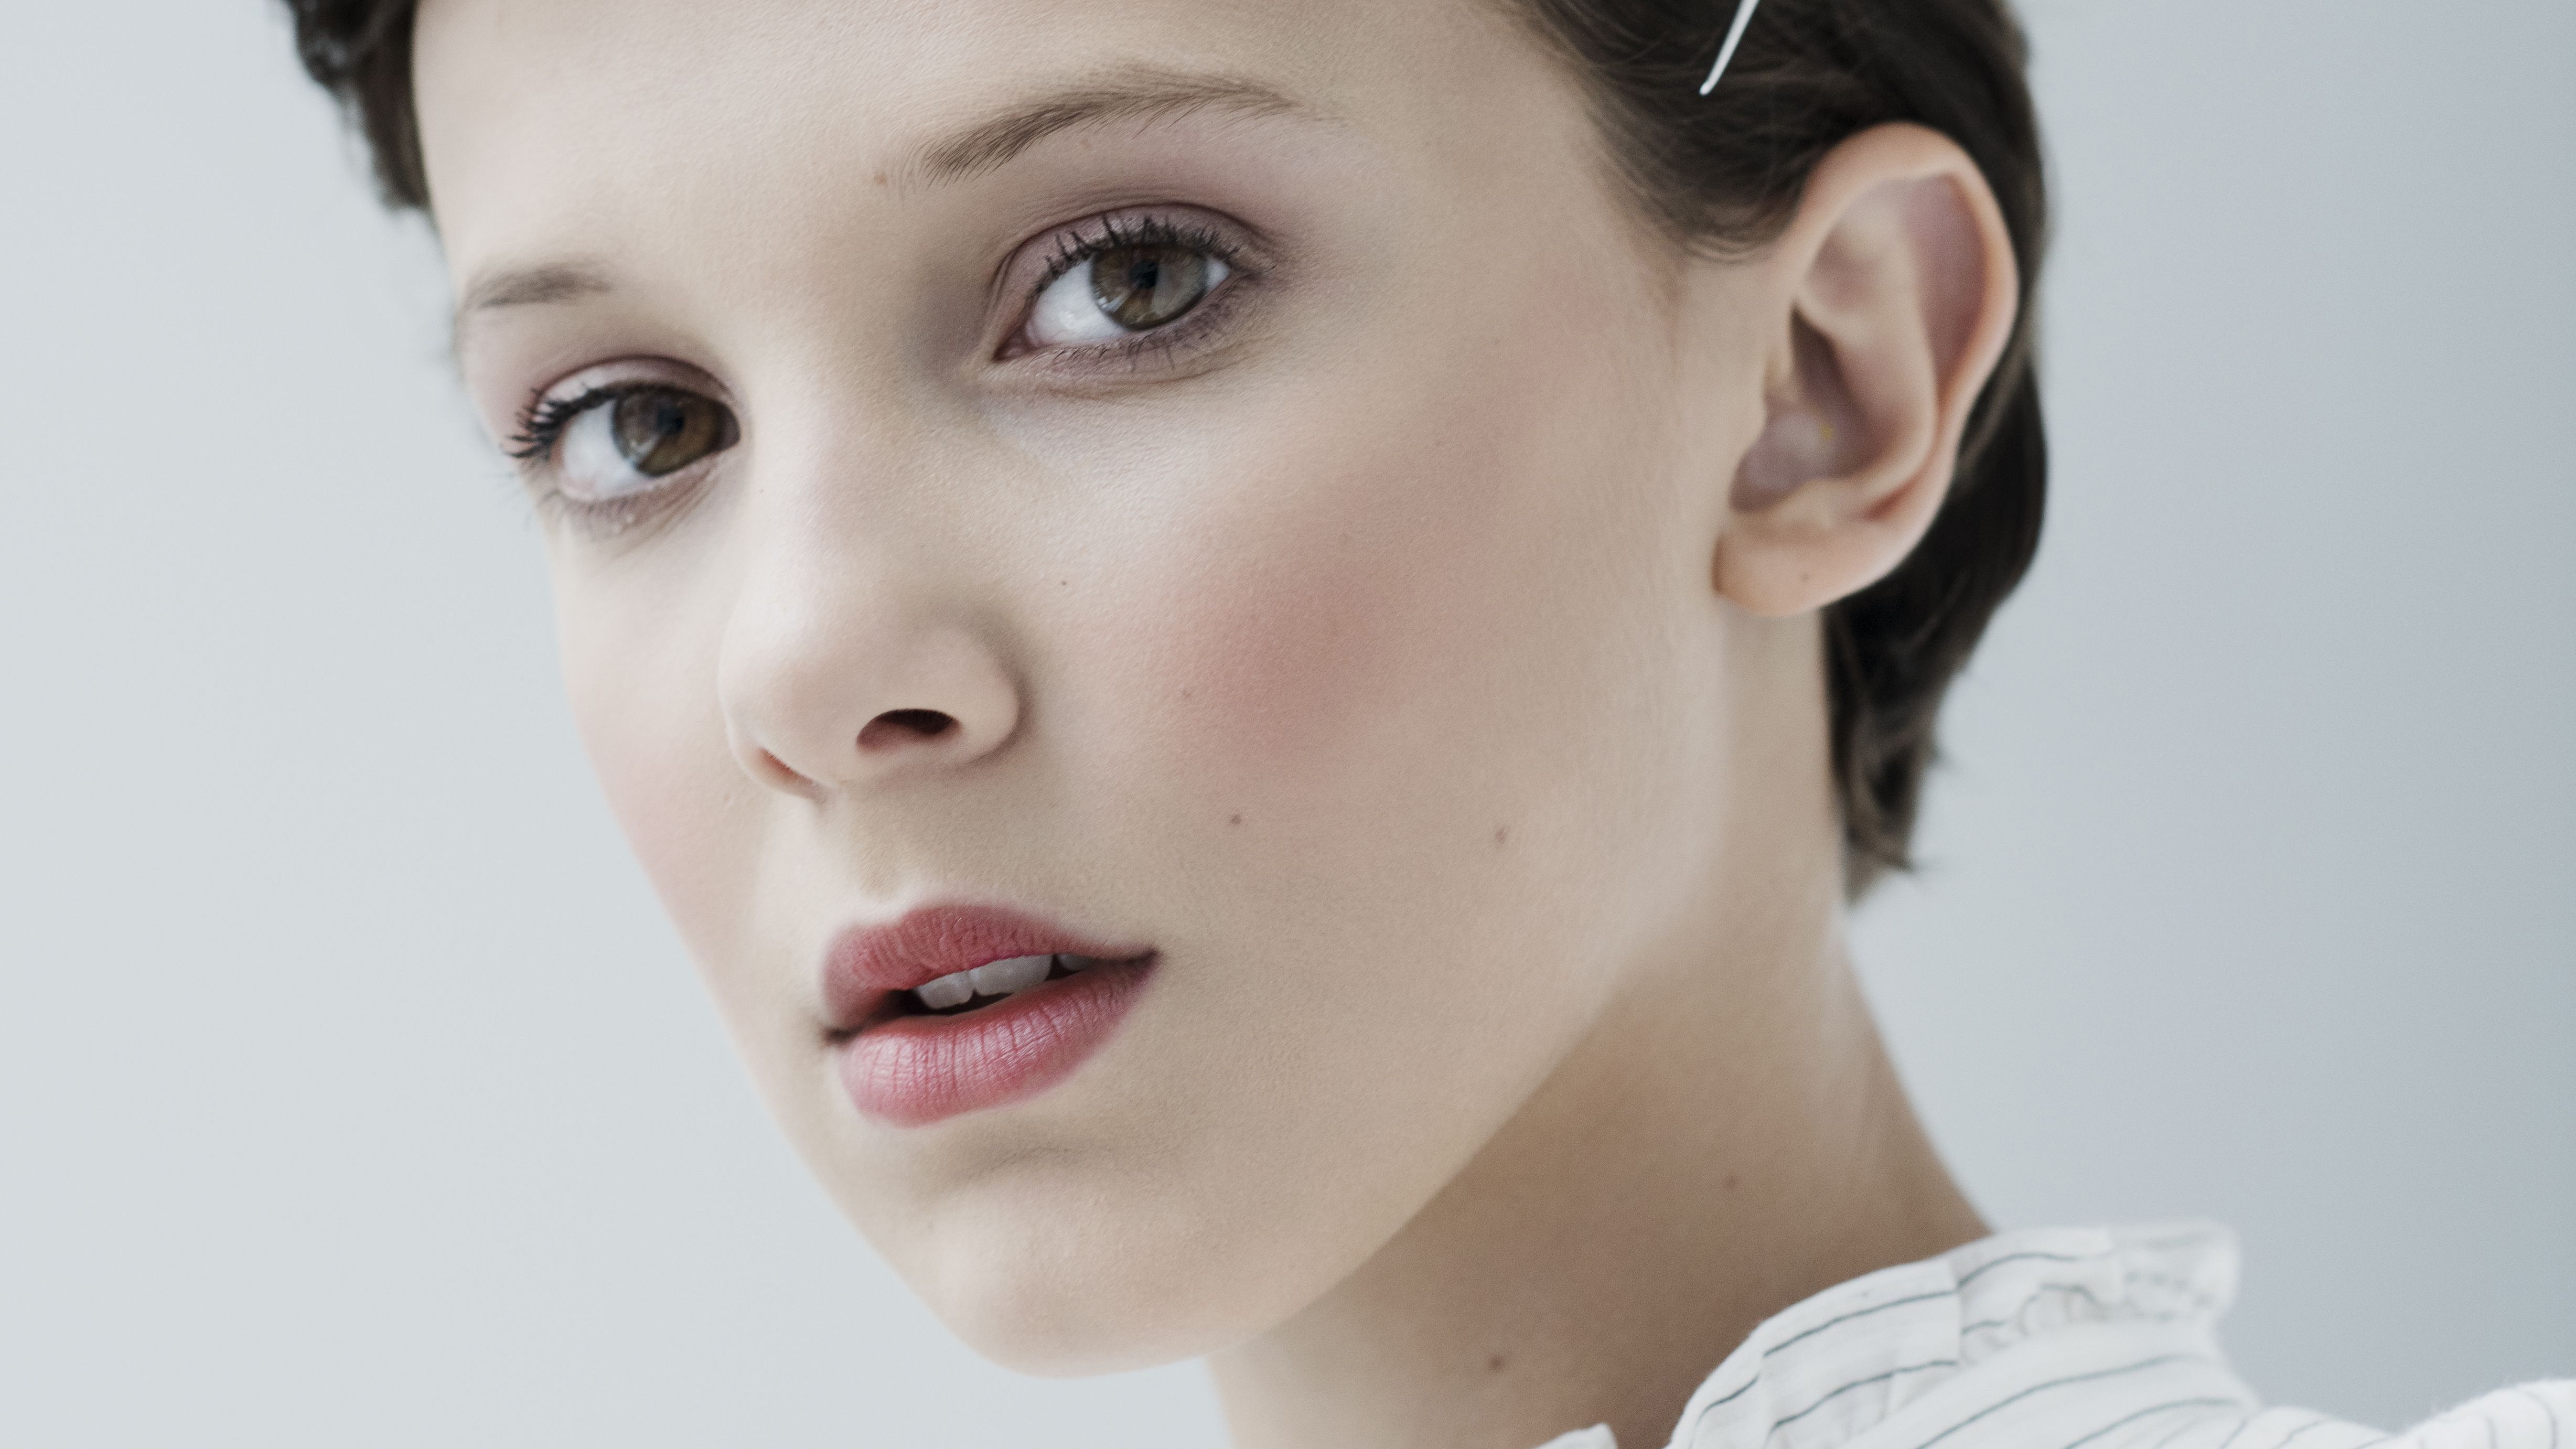 Millie Bobby Brown 2018 Wallpapers